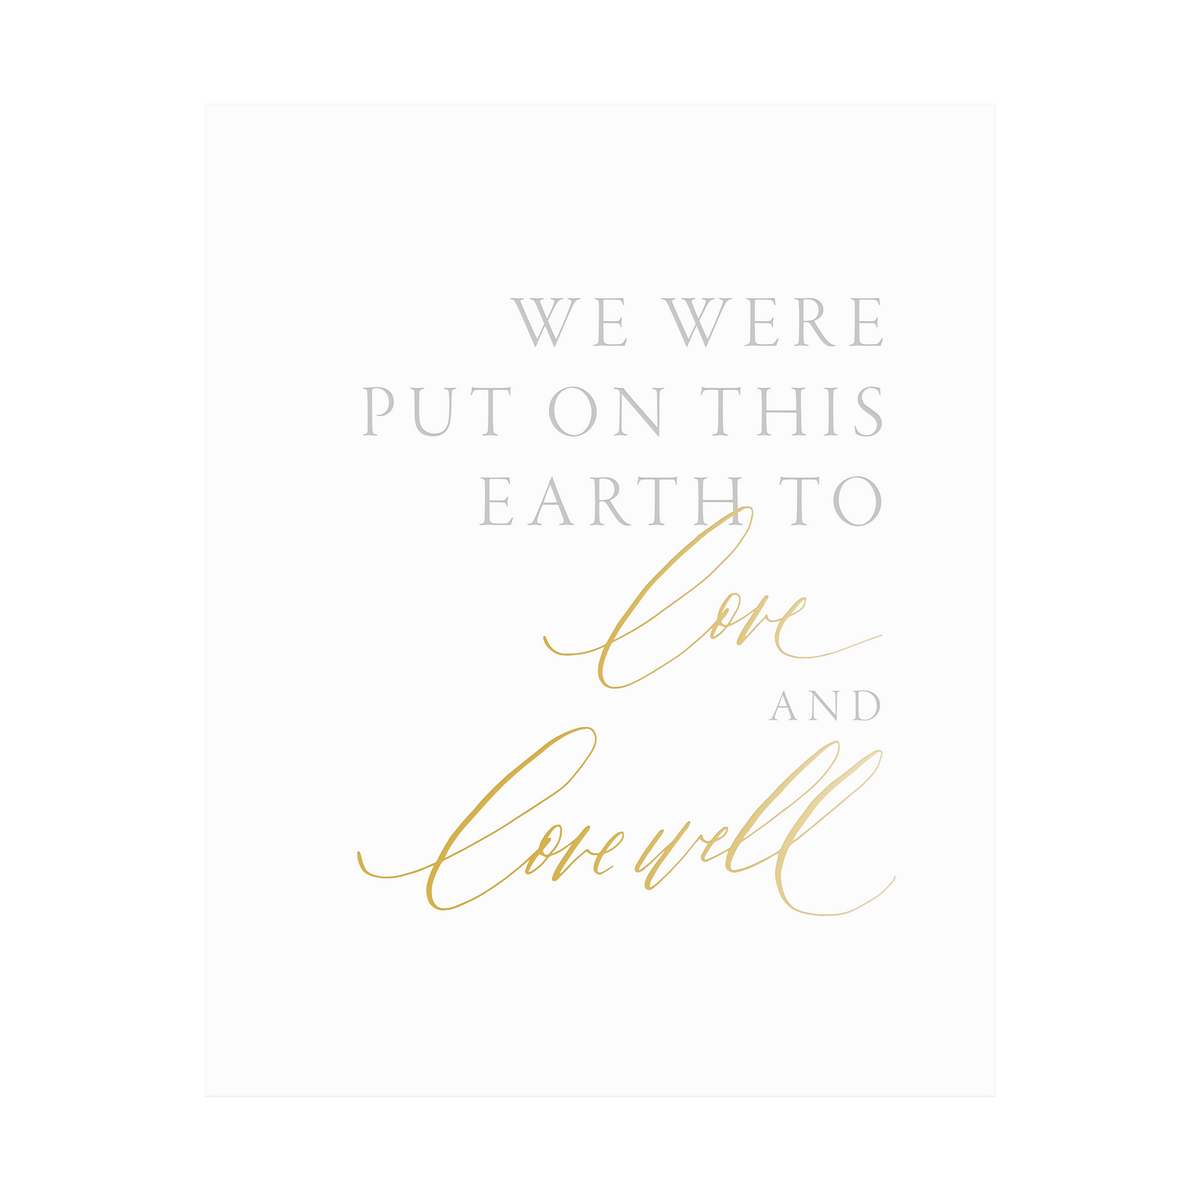 &quot;Love and Love Well&quot; Art Print, letterpress printed by hand in pale grey ink and gold foil.